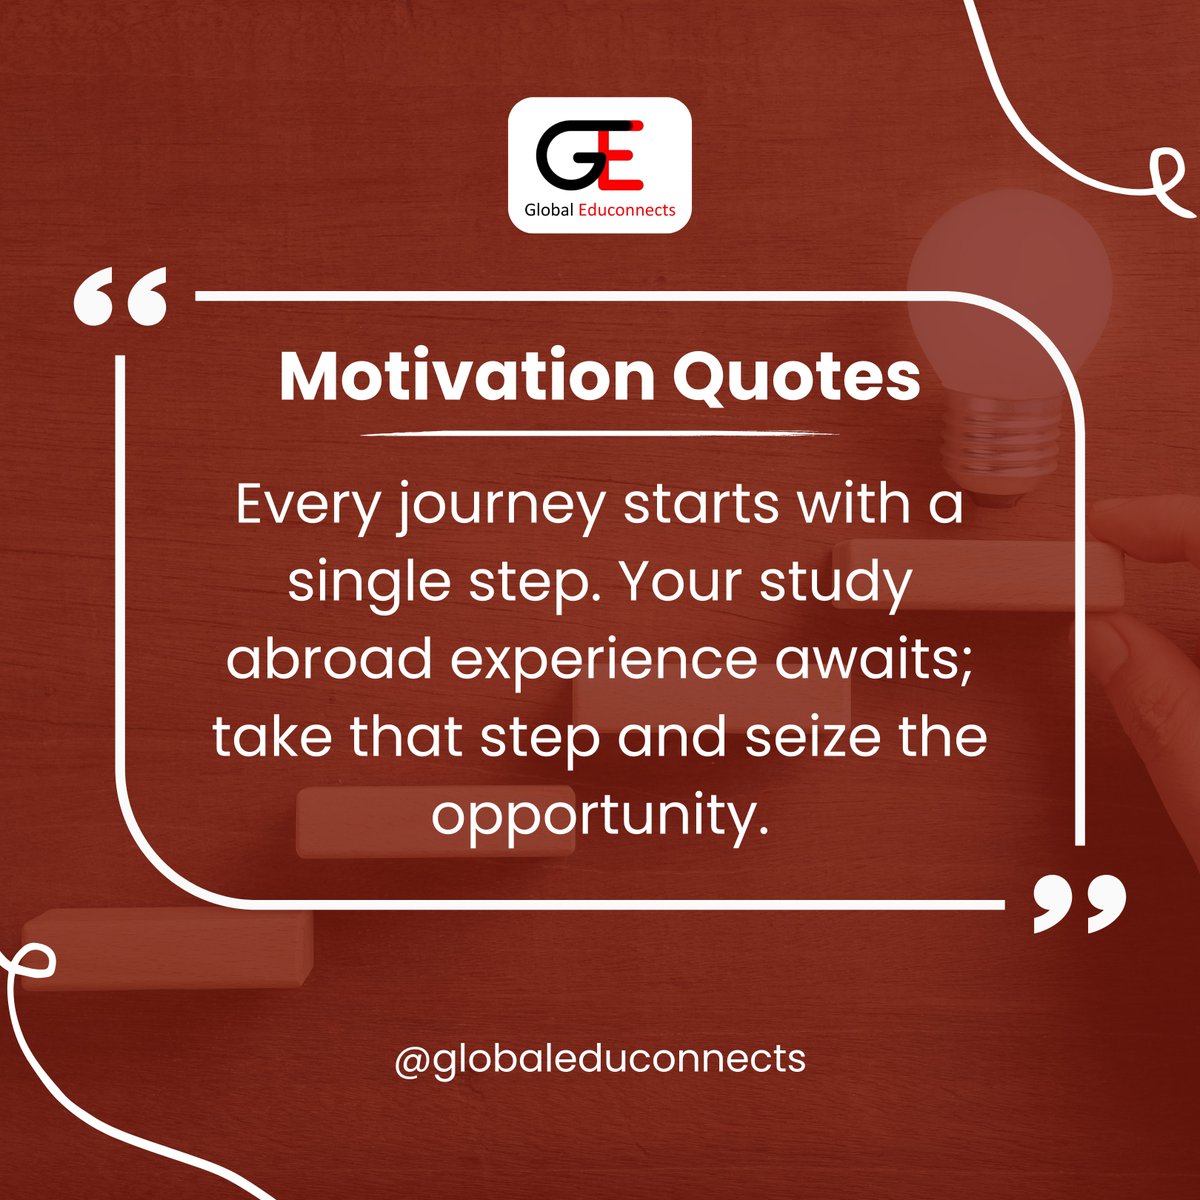 #MondayMotivational
Every journey starts with a single step. Your study abroad experience awaits; take that step and seize the opportunity.

#motivationalquote #quotes #quotestagram #quotestoliveby #quotesdaily #quotestoliveby #quotesaboutlife #globaleduconnects  #mumbai